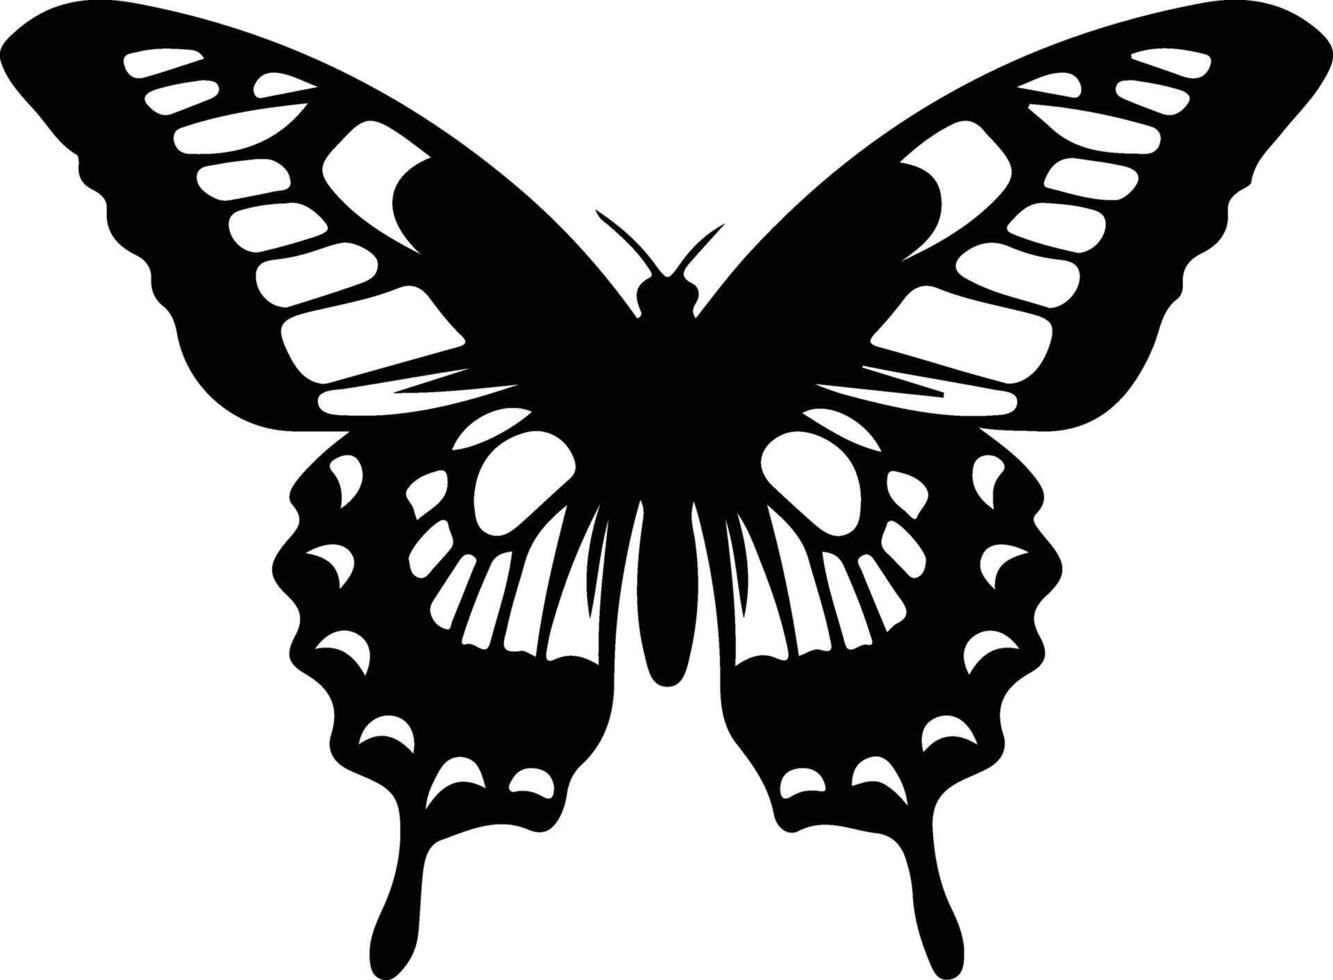 tiger swallowtail butterfly  black silhouette vector